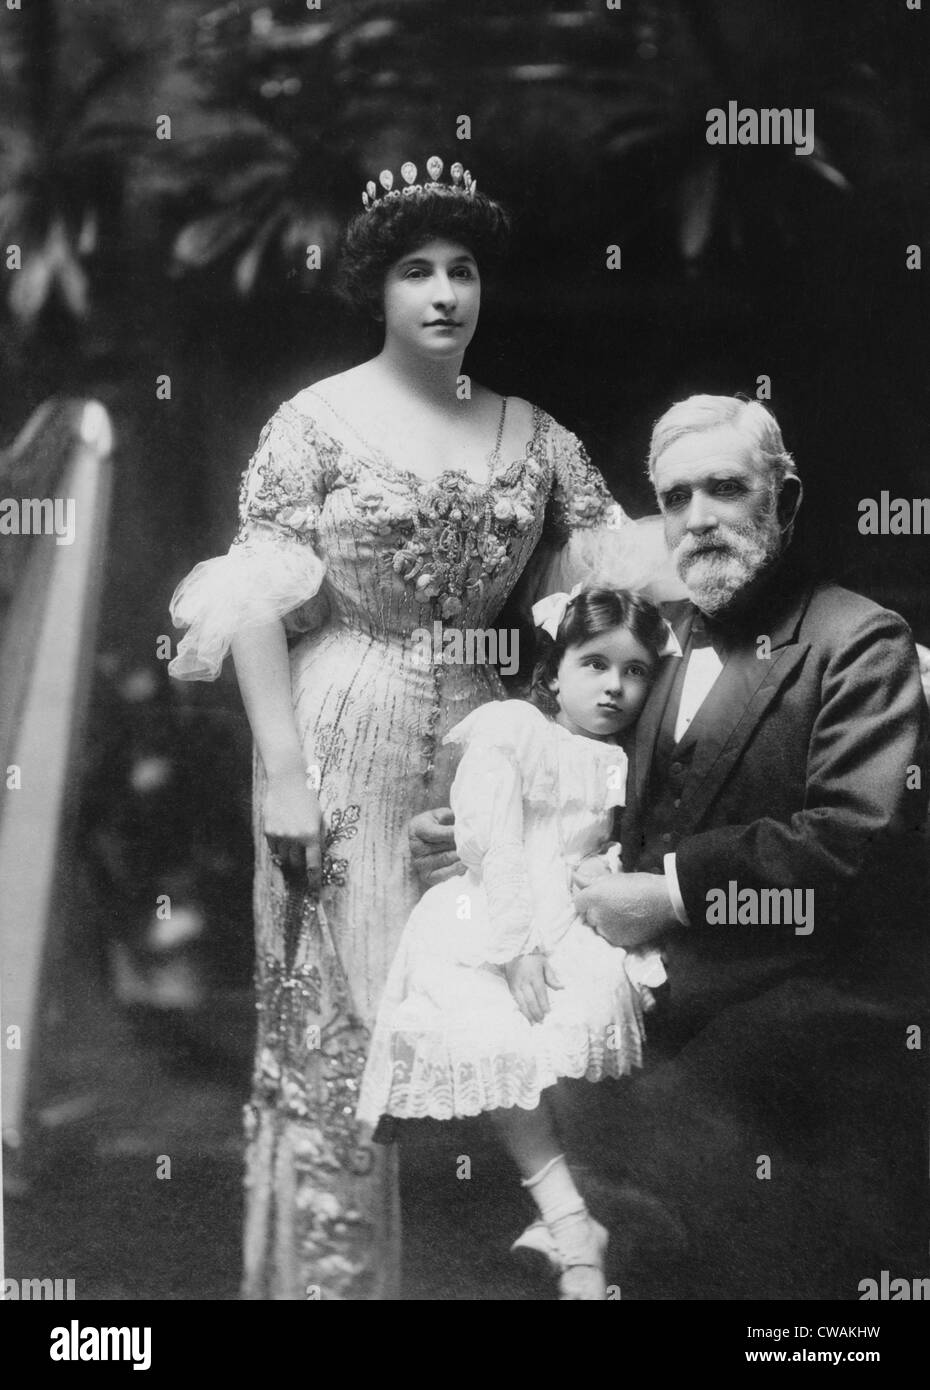 Nellie Melba (1859-1931), popular opera star with her father, David Mitchell, and a young girl, in her native Melbourne, Stock Photo